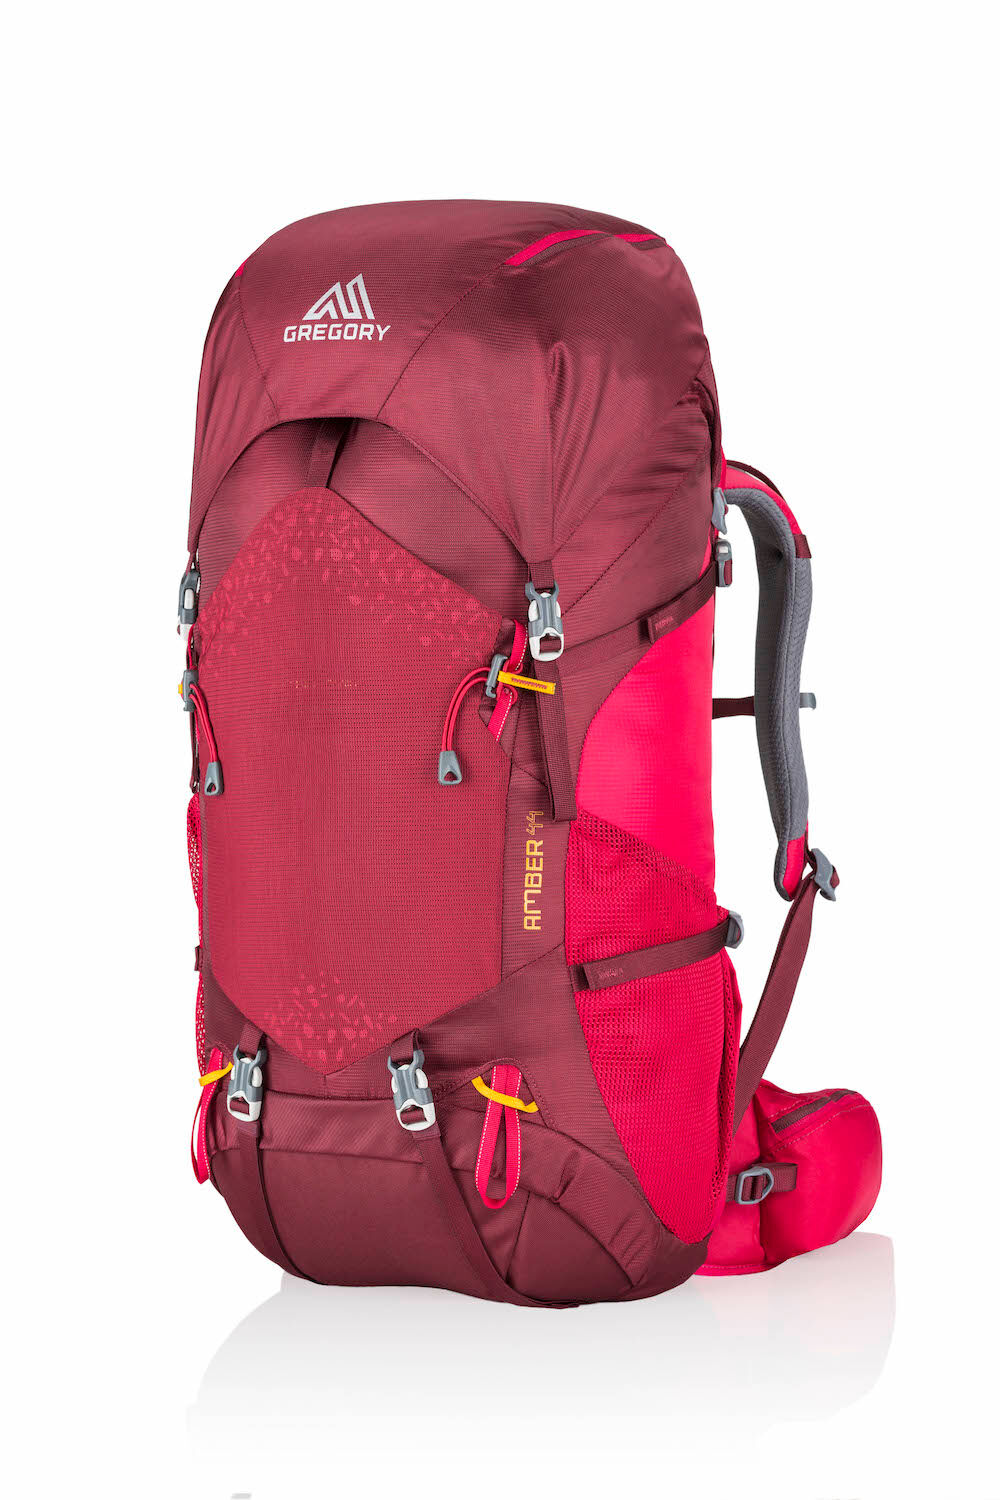 Gregory Amber 44 - Hiking backpack - Women's